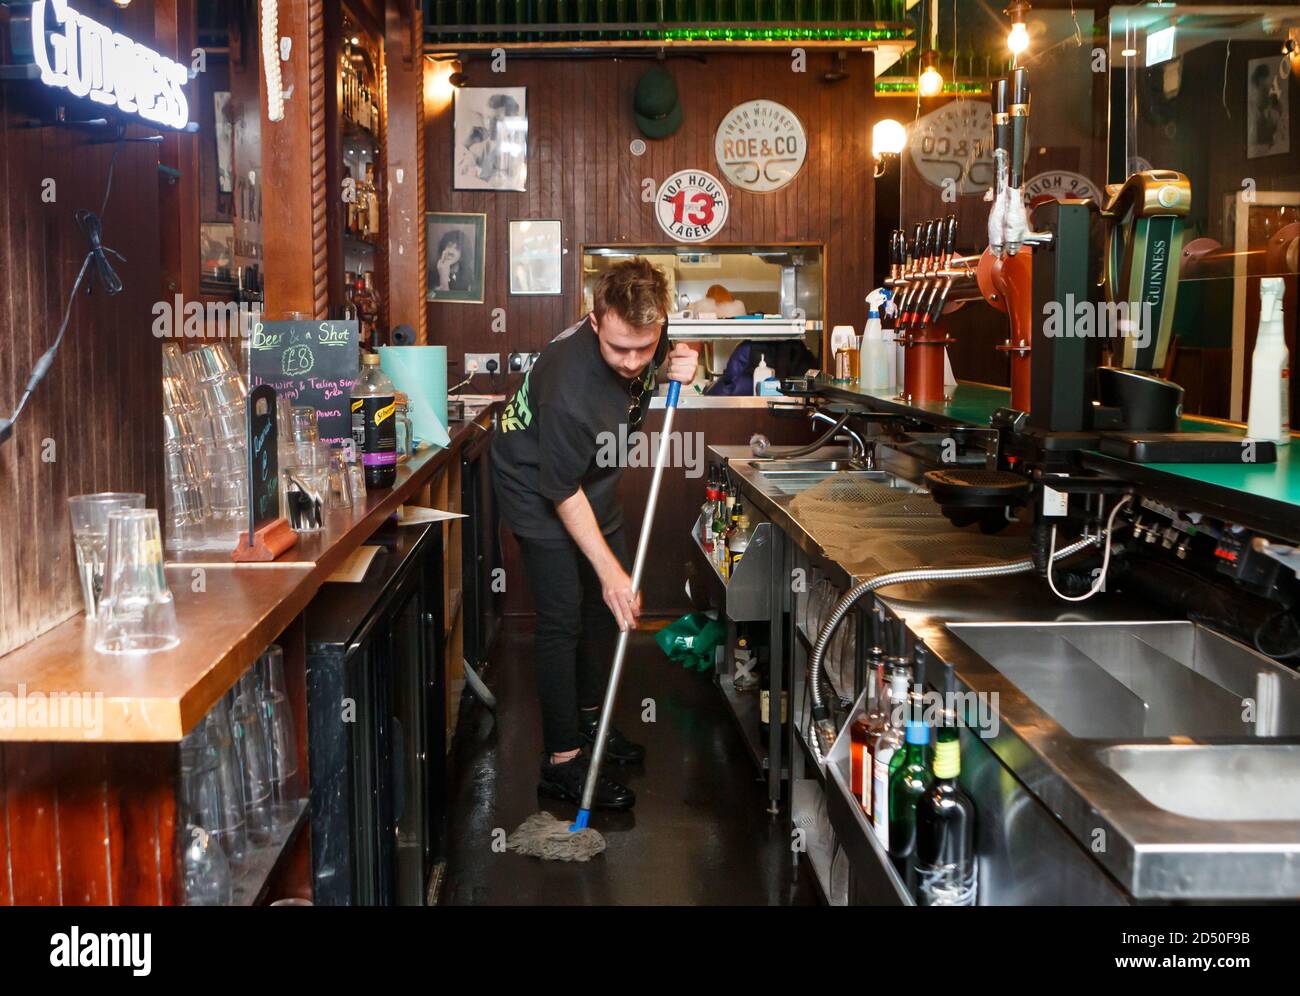 A staff member in The Corner Boy pub mopping the floor and closing up for the evening, in Manchester. The Government is expected to announce new measures later today that could see pubs and bars forced to close to combat the spread of the virus in northern England and other areas suffering a surge in Covid-19 cases. Stock Photo